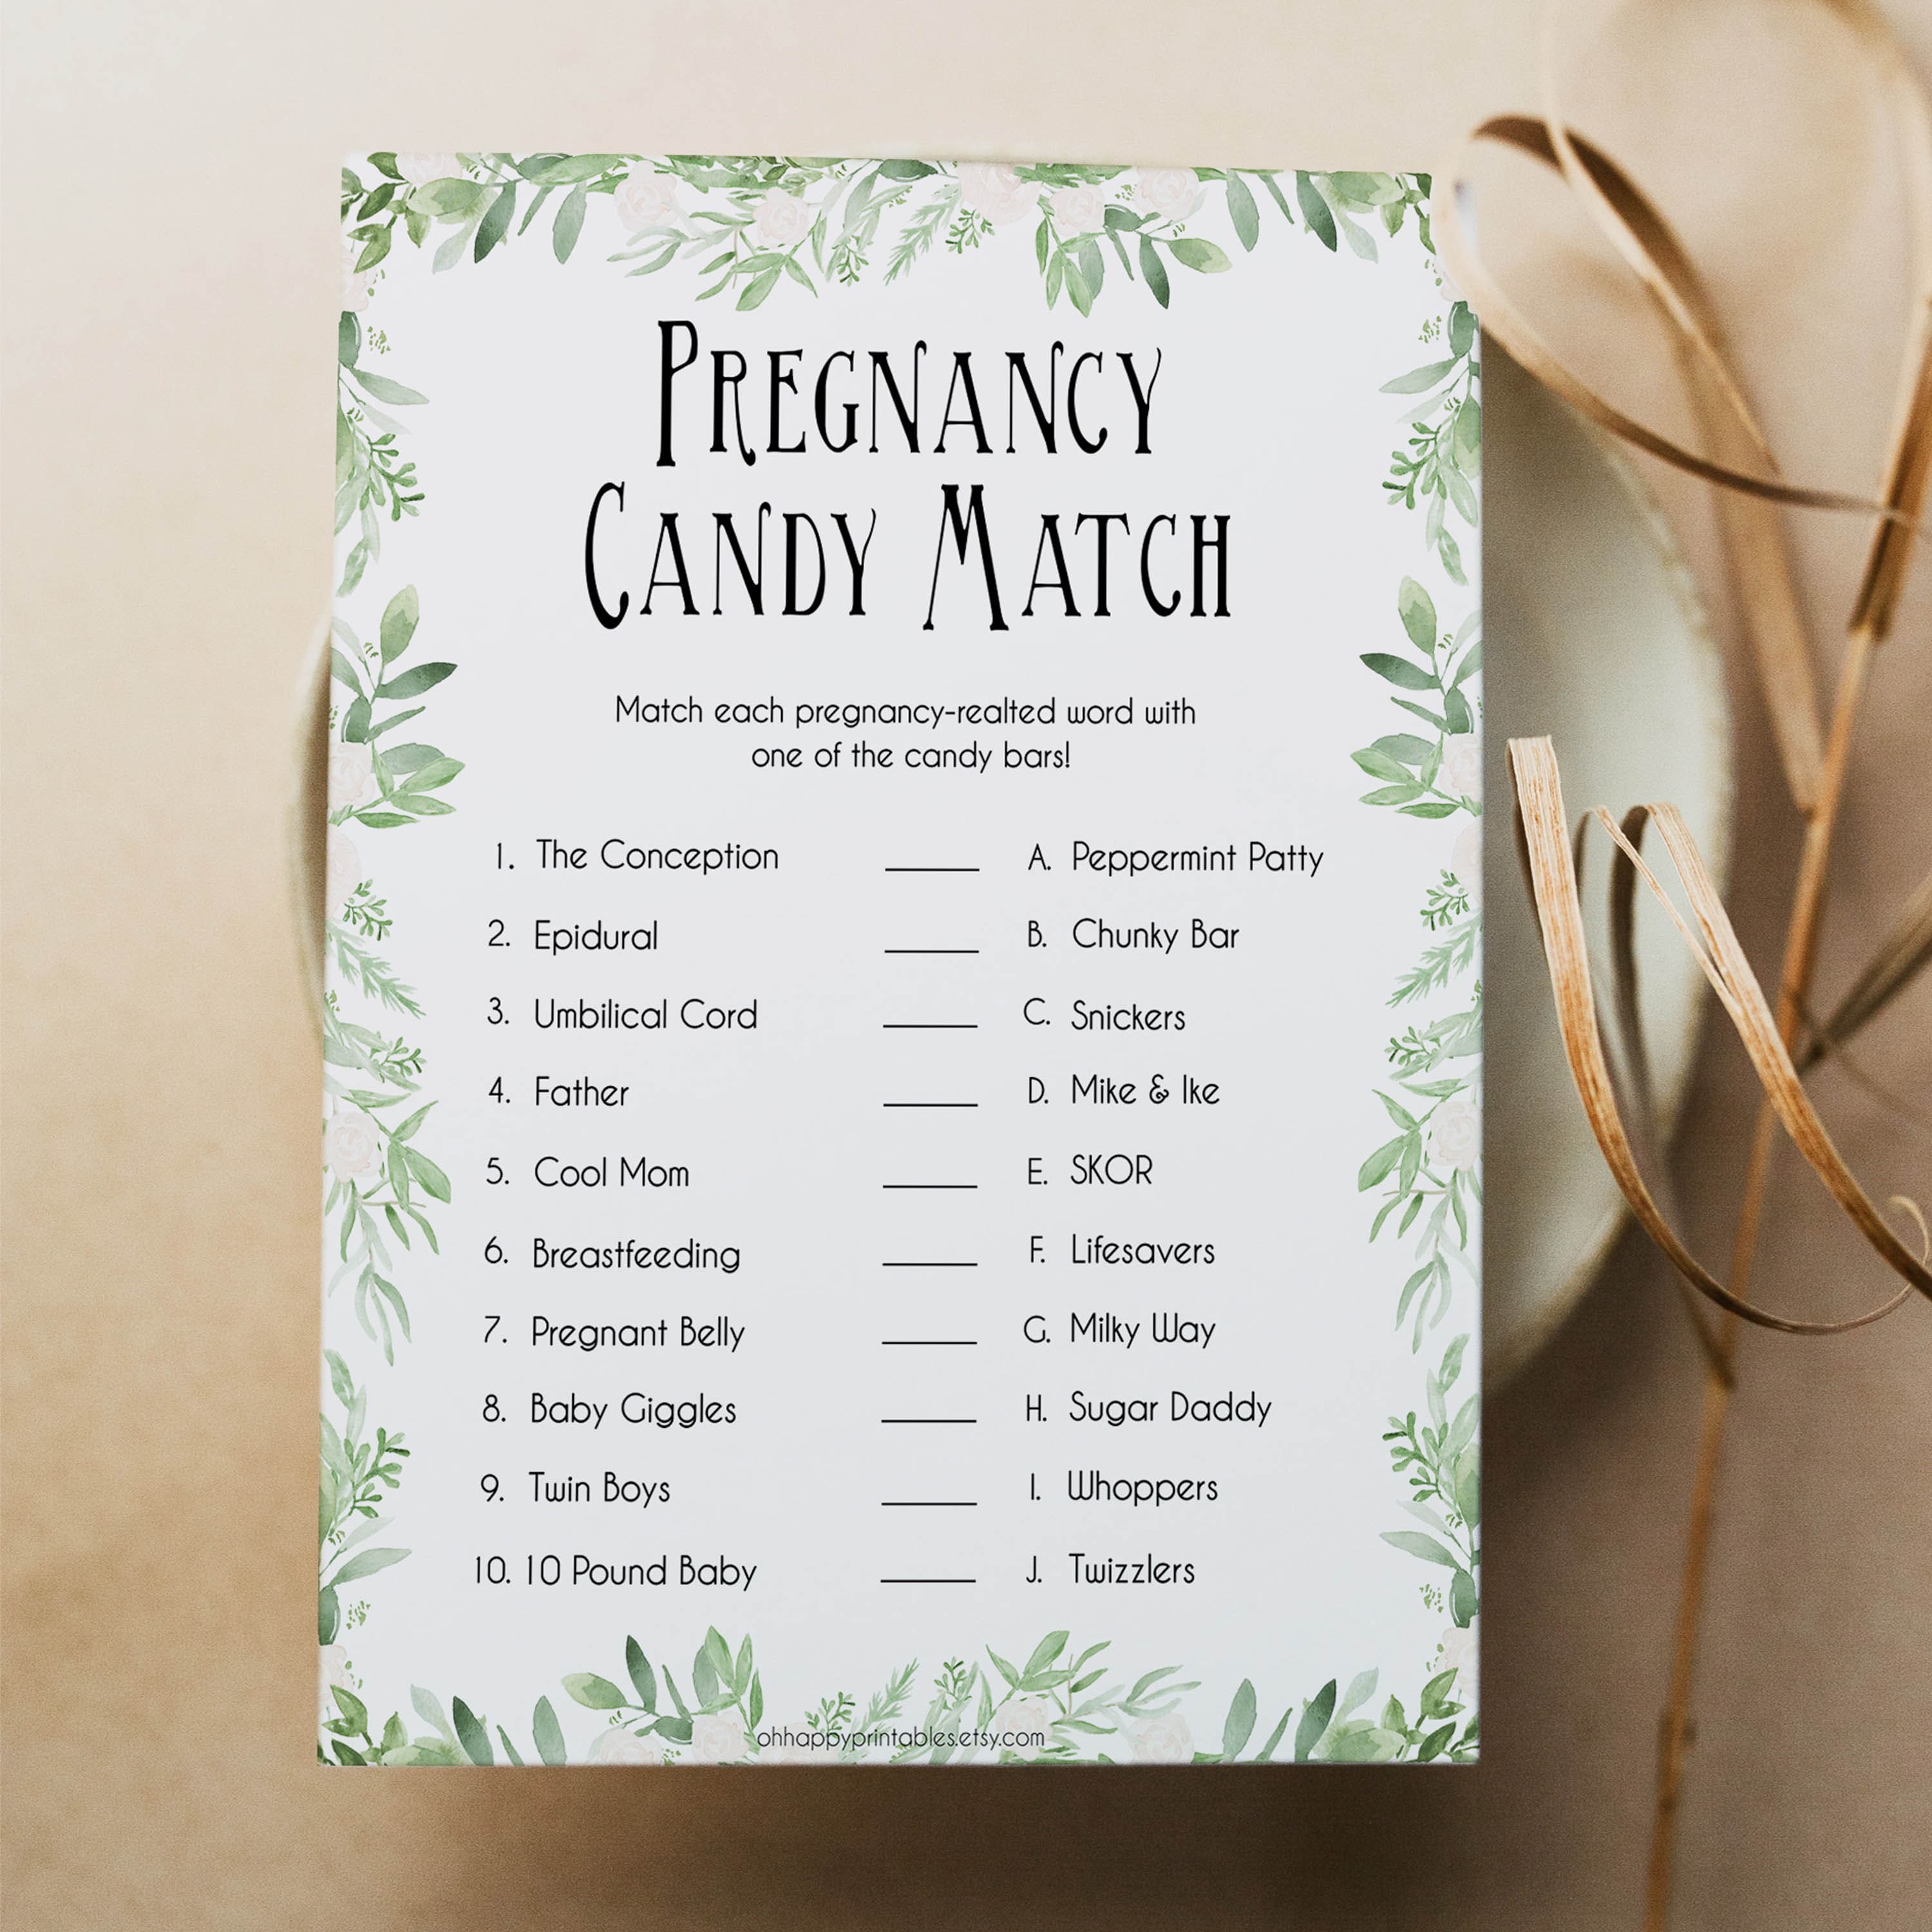 Pregnancy Candy Match Game, Greenery Baby Shower Games, Botanical Candy Match Baby Game, Fun Baby Shower Games, Pregnancy Candy Match, fun baby shower games, printable baby shower games